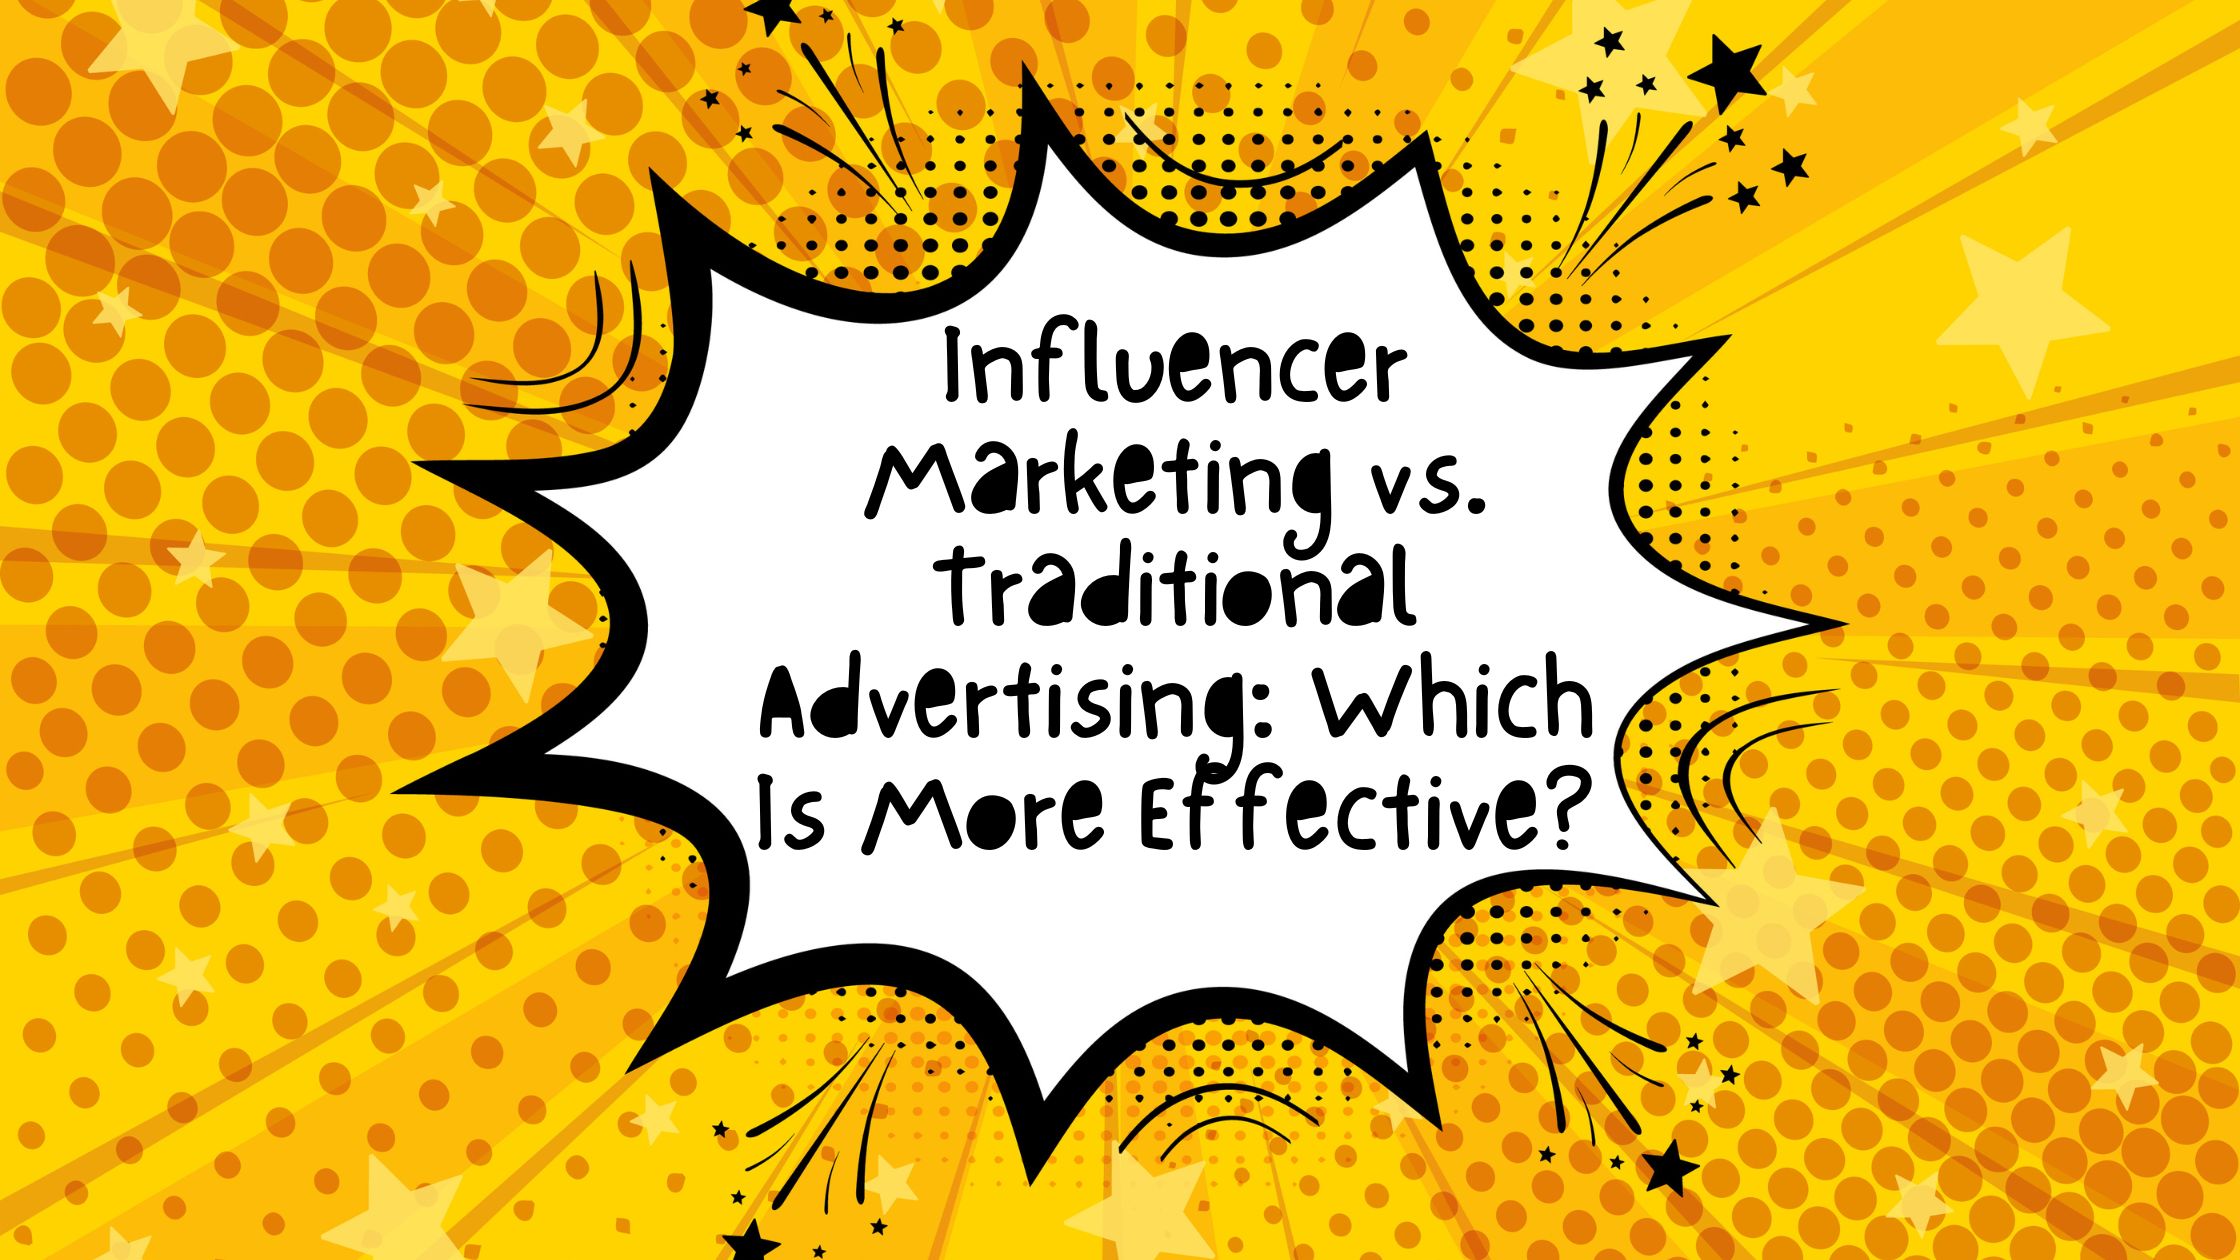 Influencer Marketing vs. Traditional Advertising: Which Is More Effective?